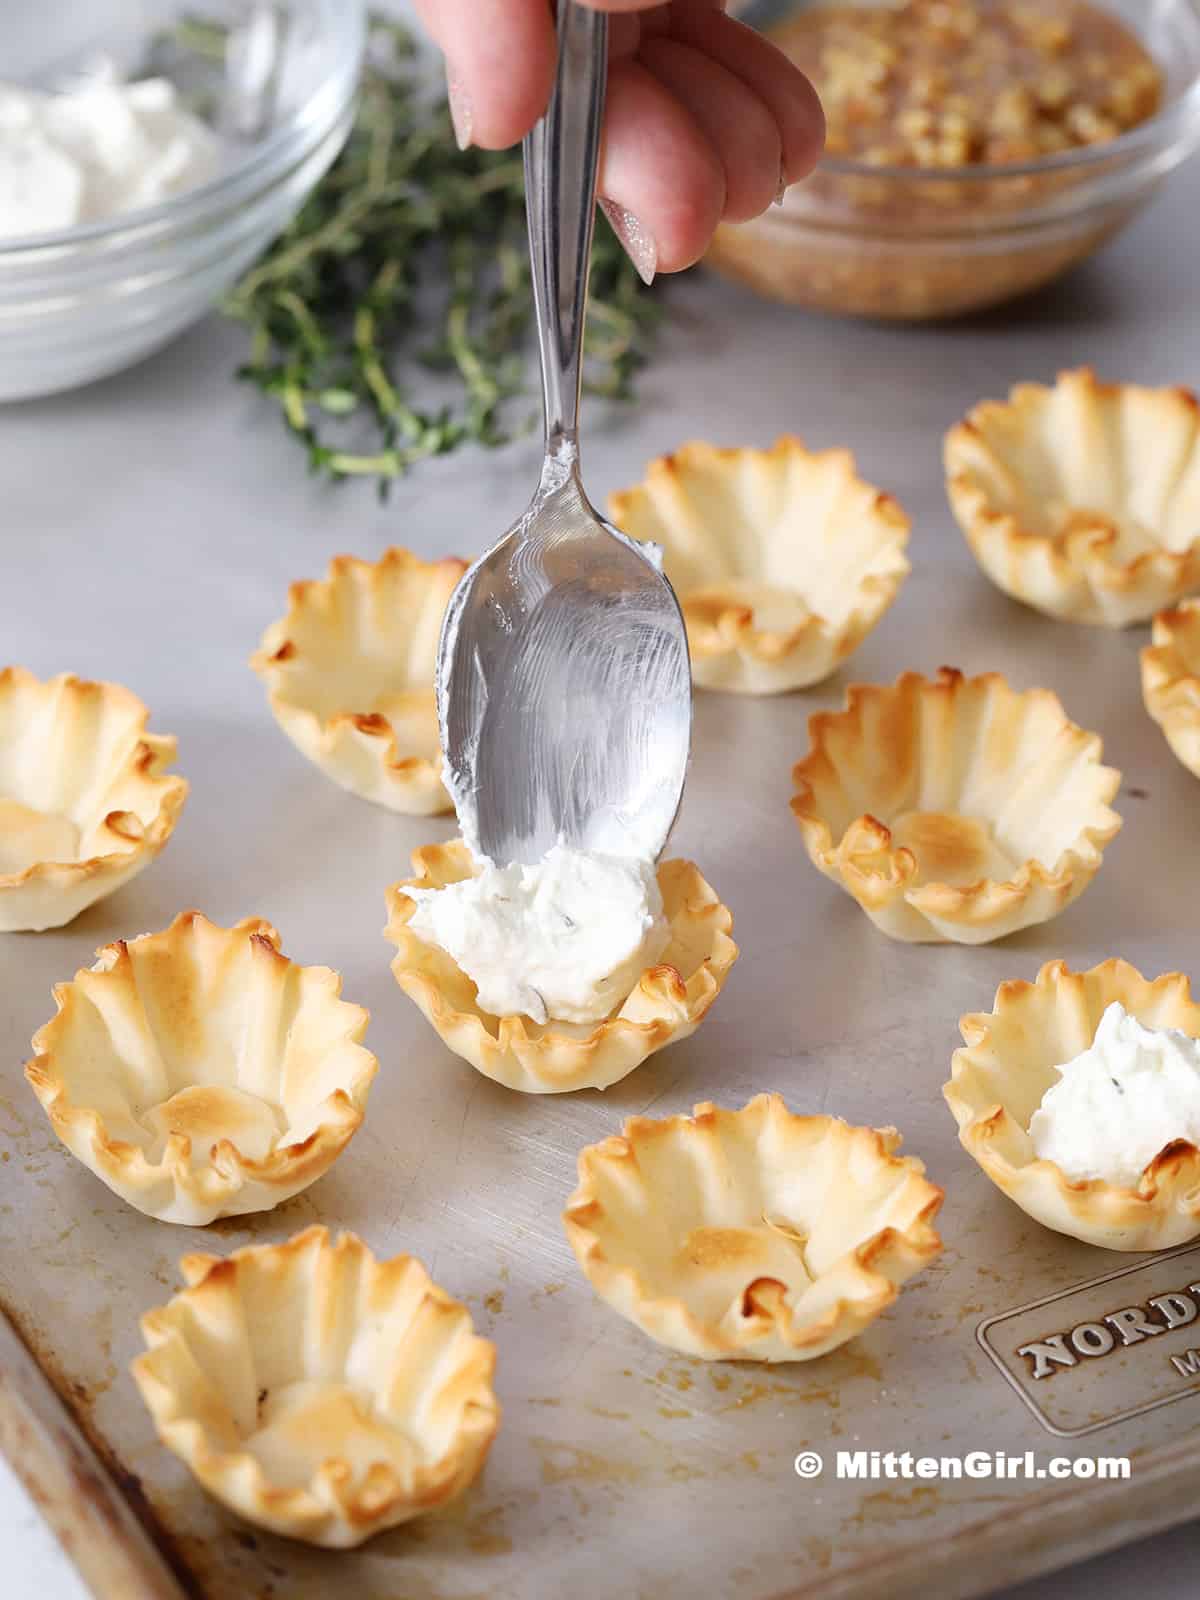 A hand placing a spoon with goat cheese mixture into a phyllo cup.